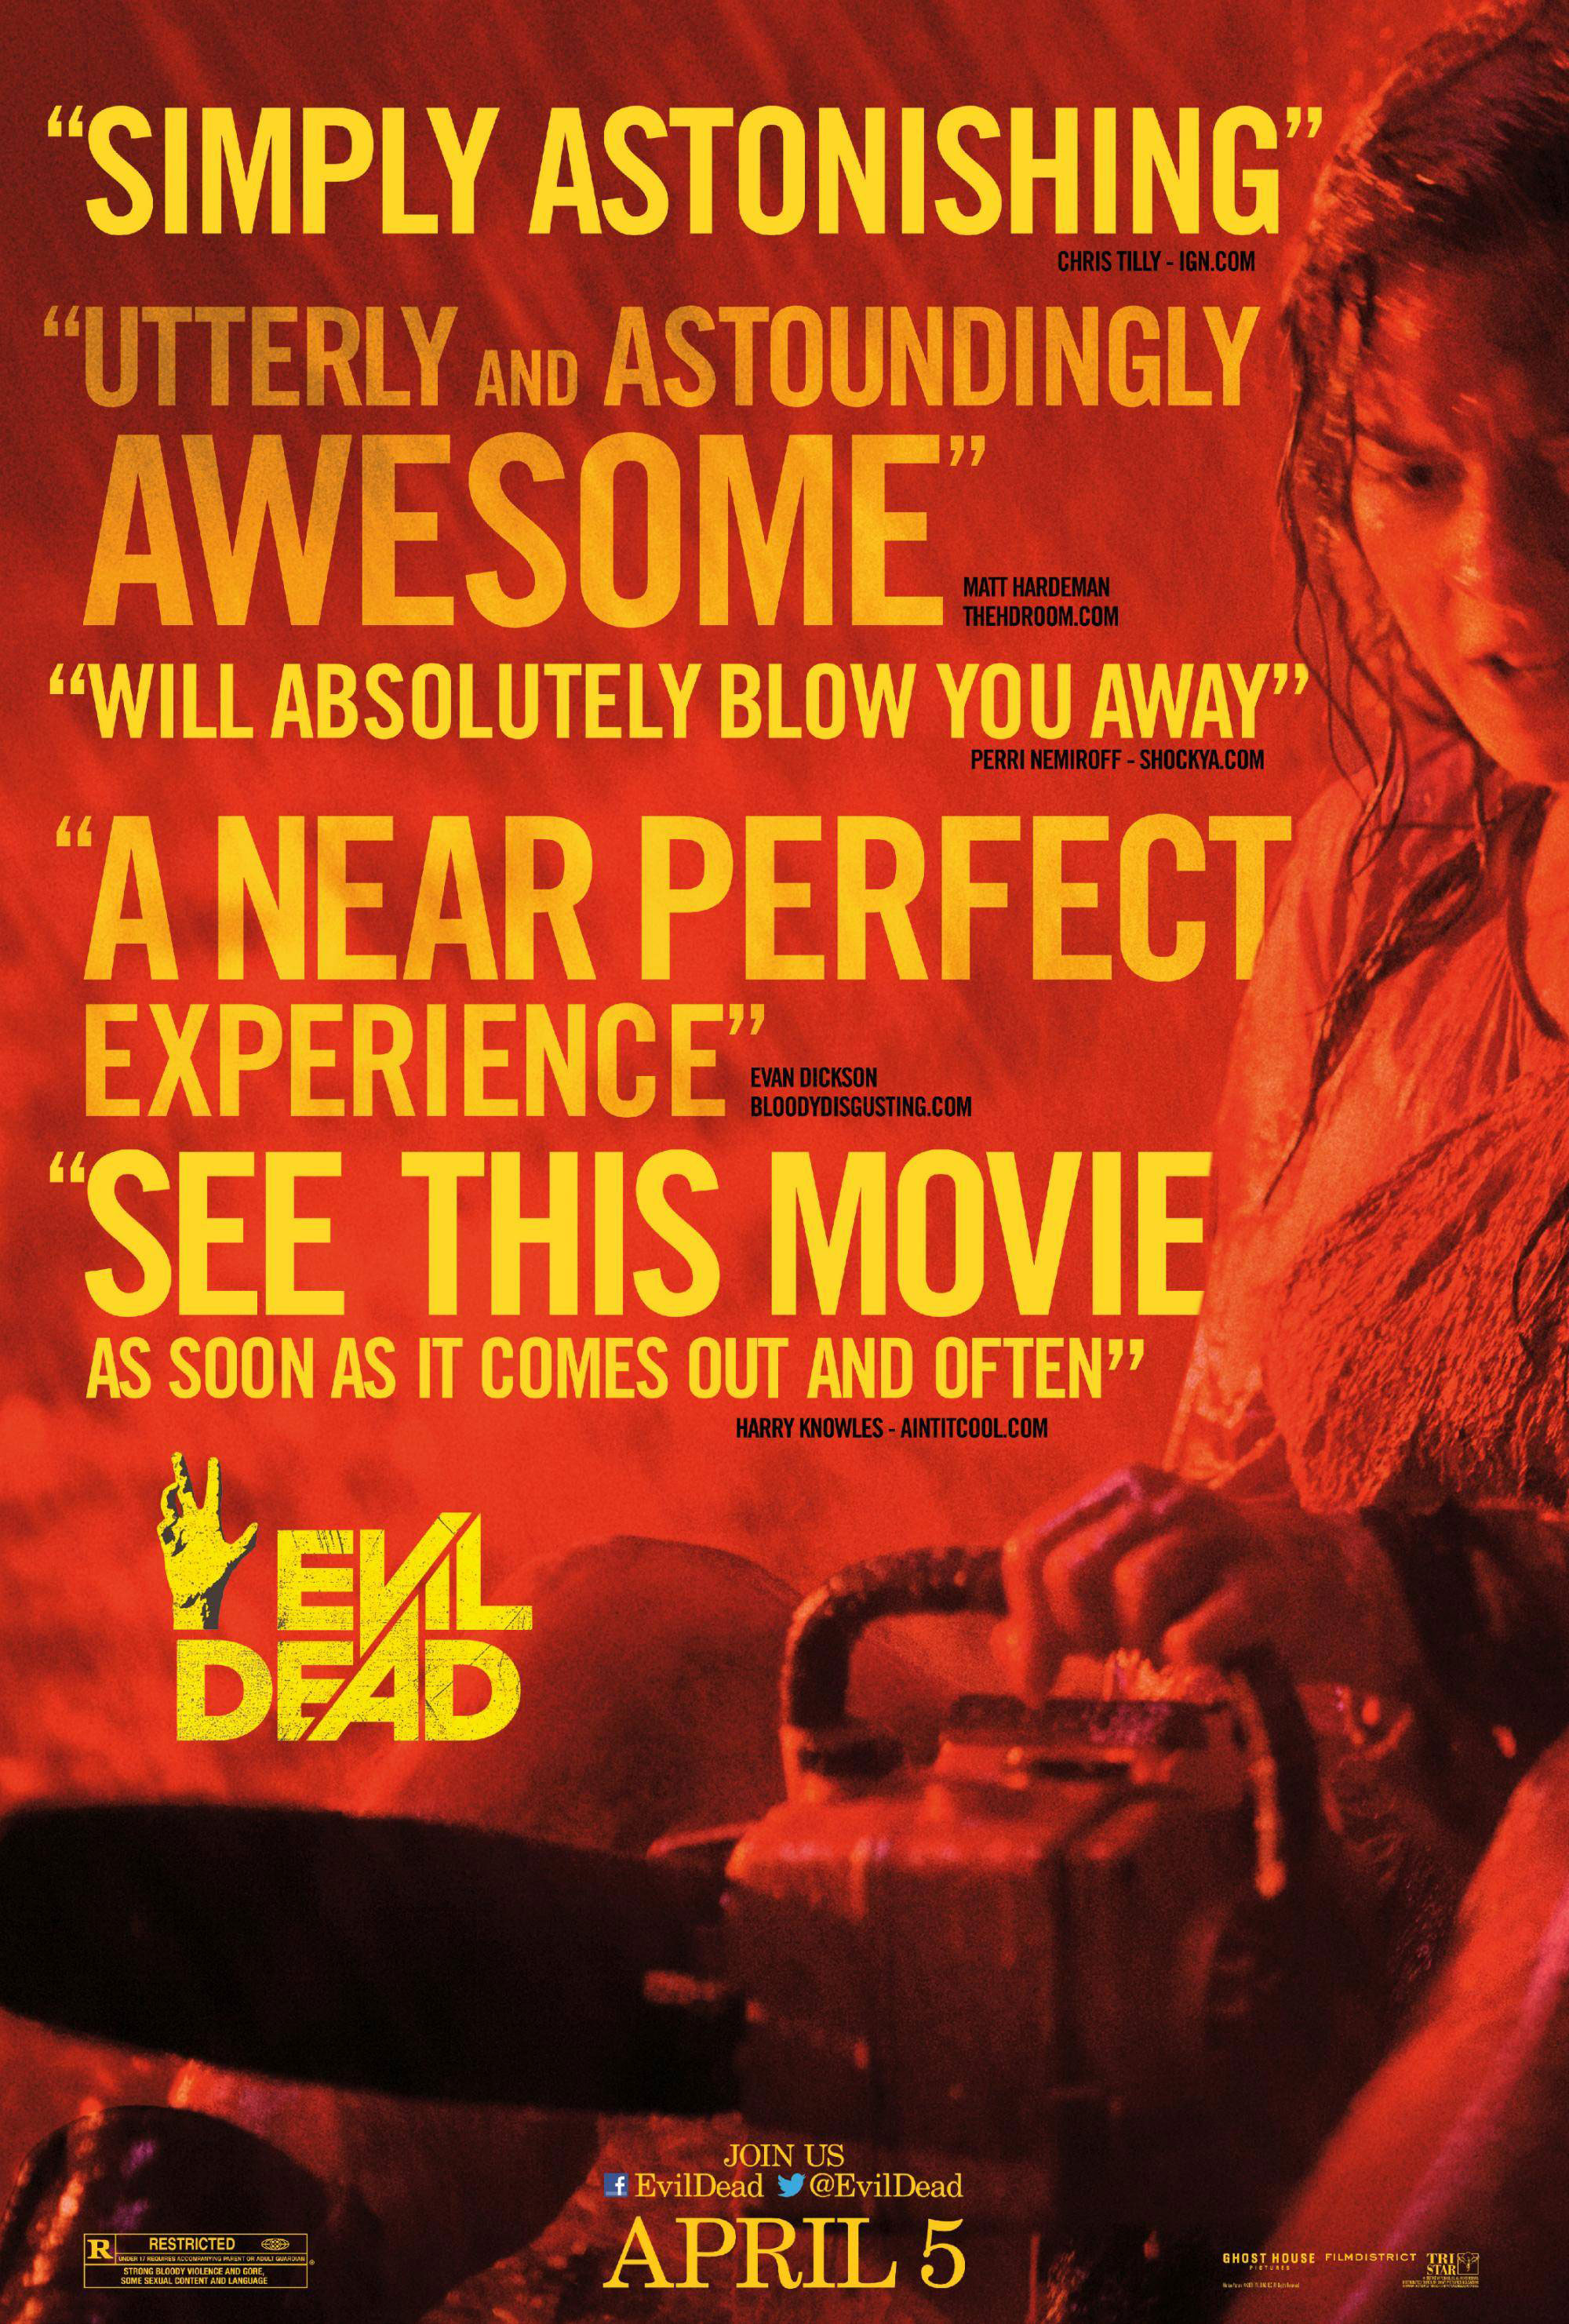 Evil Dead Poster with Shockya.com Quote